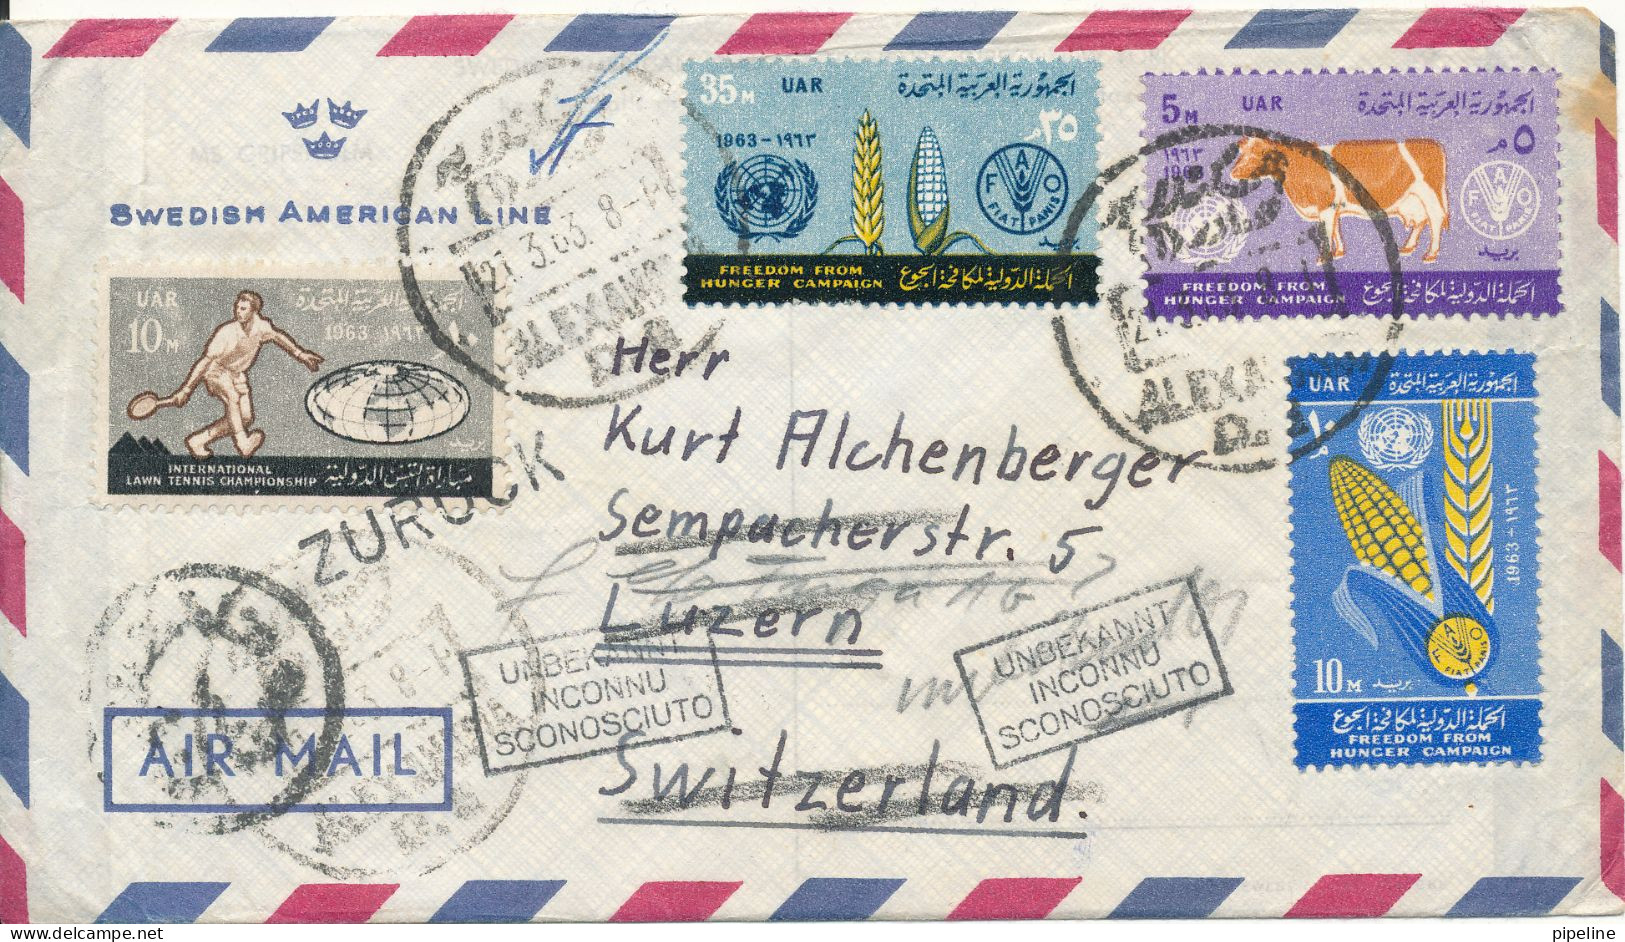 UAR Egypt Air Mail Cover Sent To Switzerland 21-3-1963 And Returned Because Of Unknown Address (Swedish American Line) - Poste Aérienne